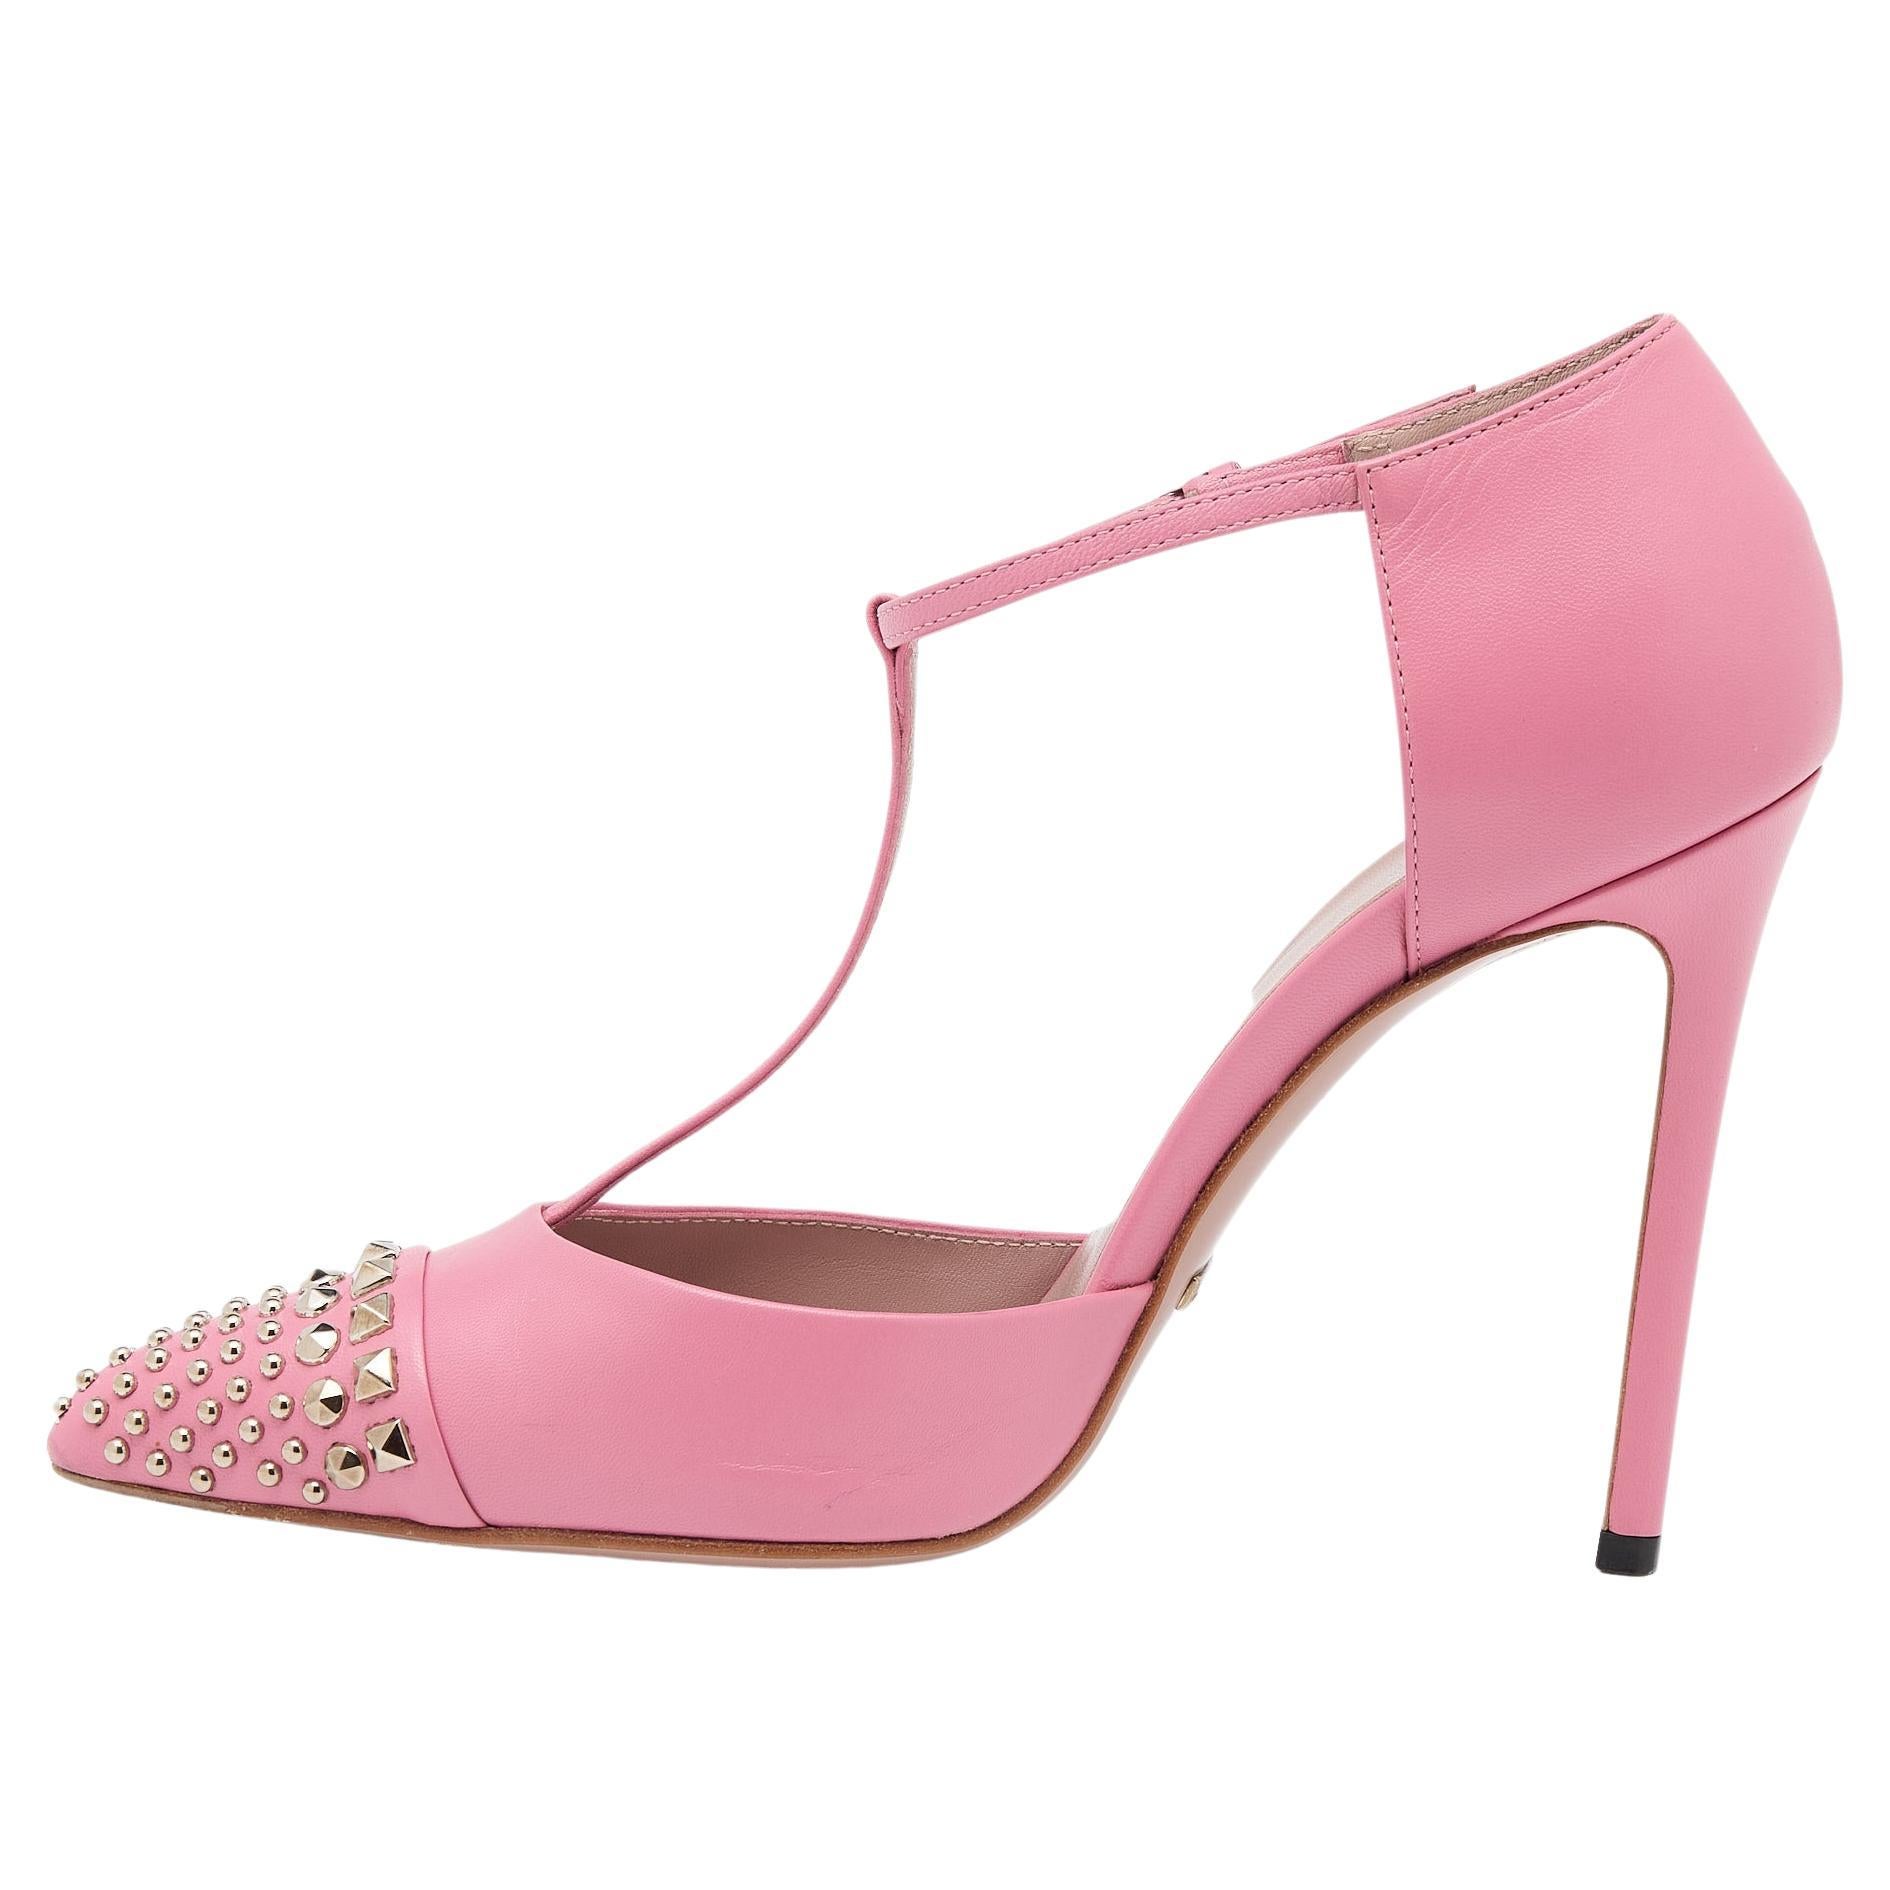 Gucci Pink Leather Malaga Studded T Strap Pumps Size 38.5